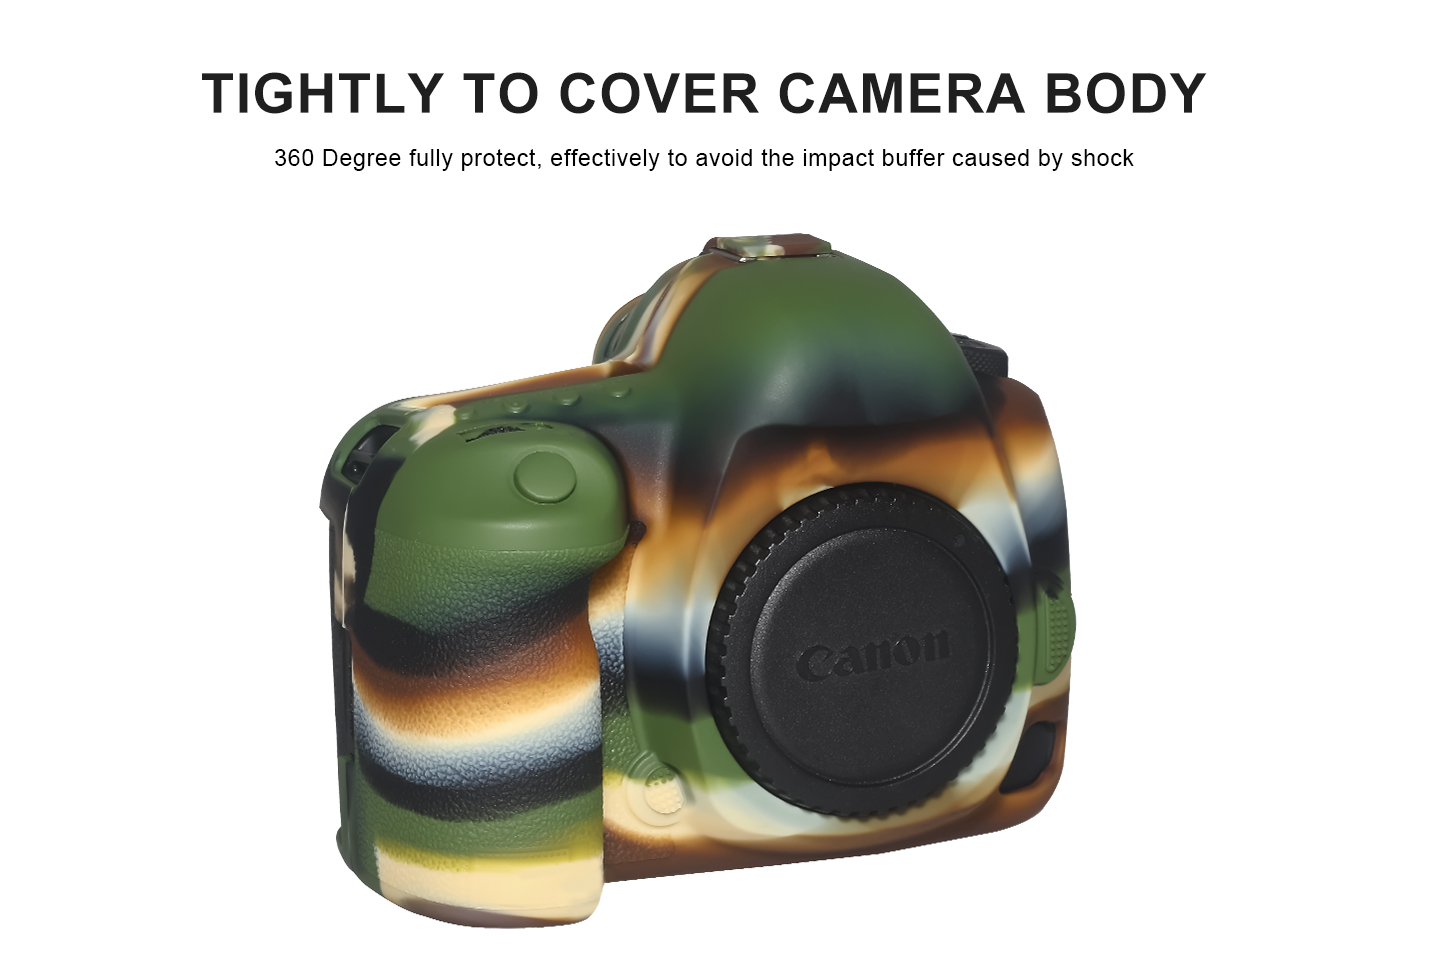 TIGHTLY TO COVER CAMERA BODY